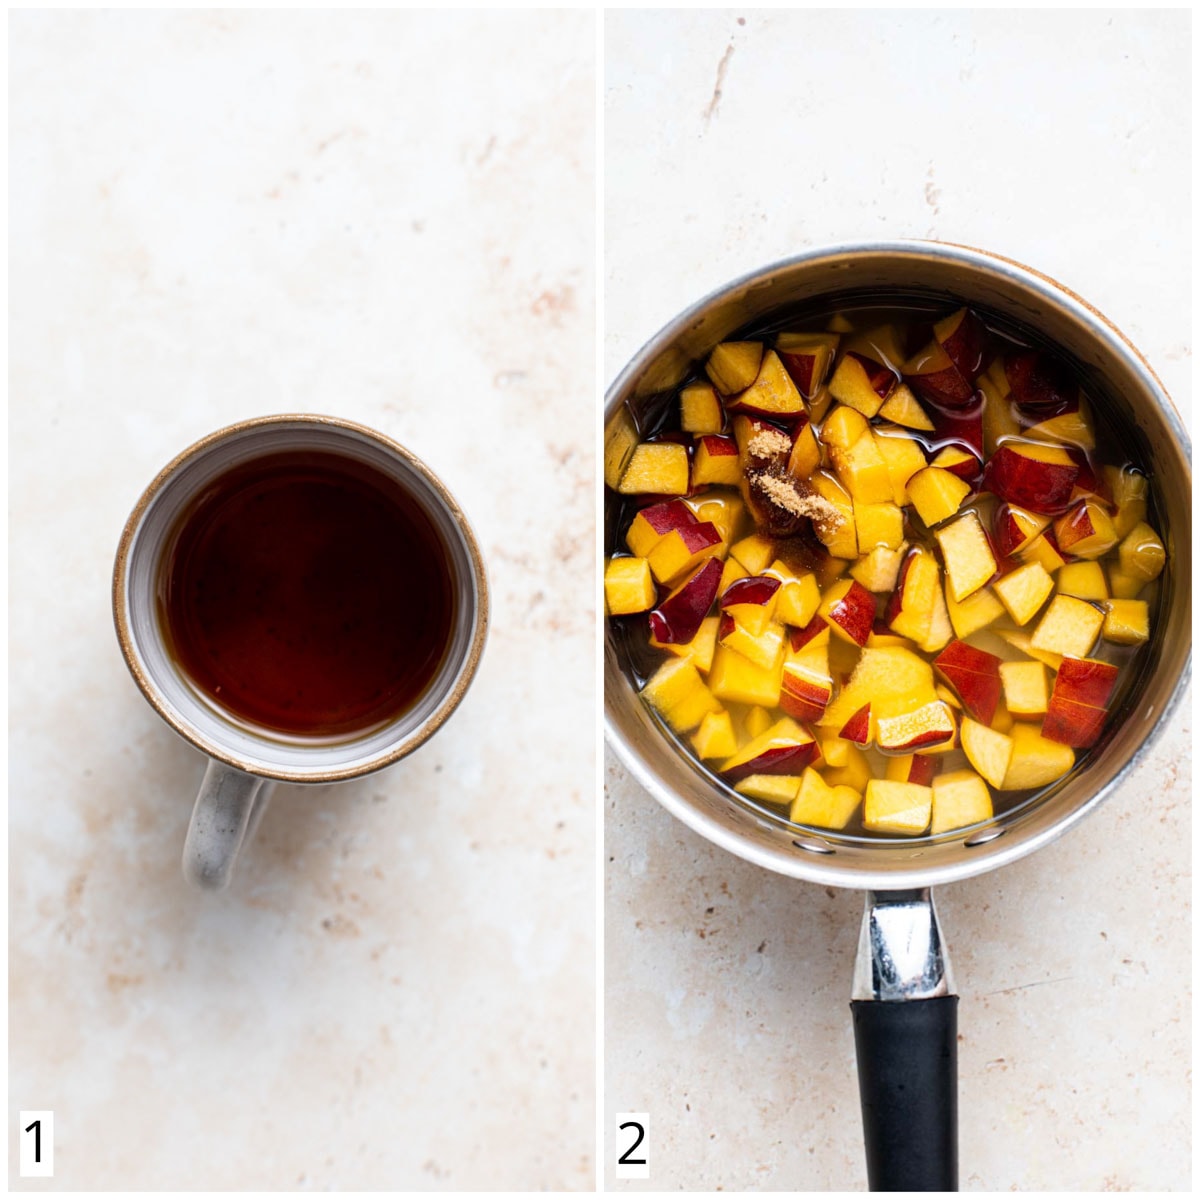 A collage of two images showing a mug of tea and a saucepan with peaches.